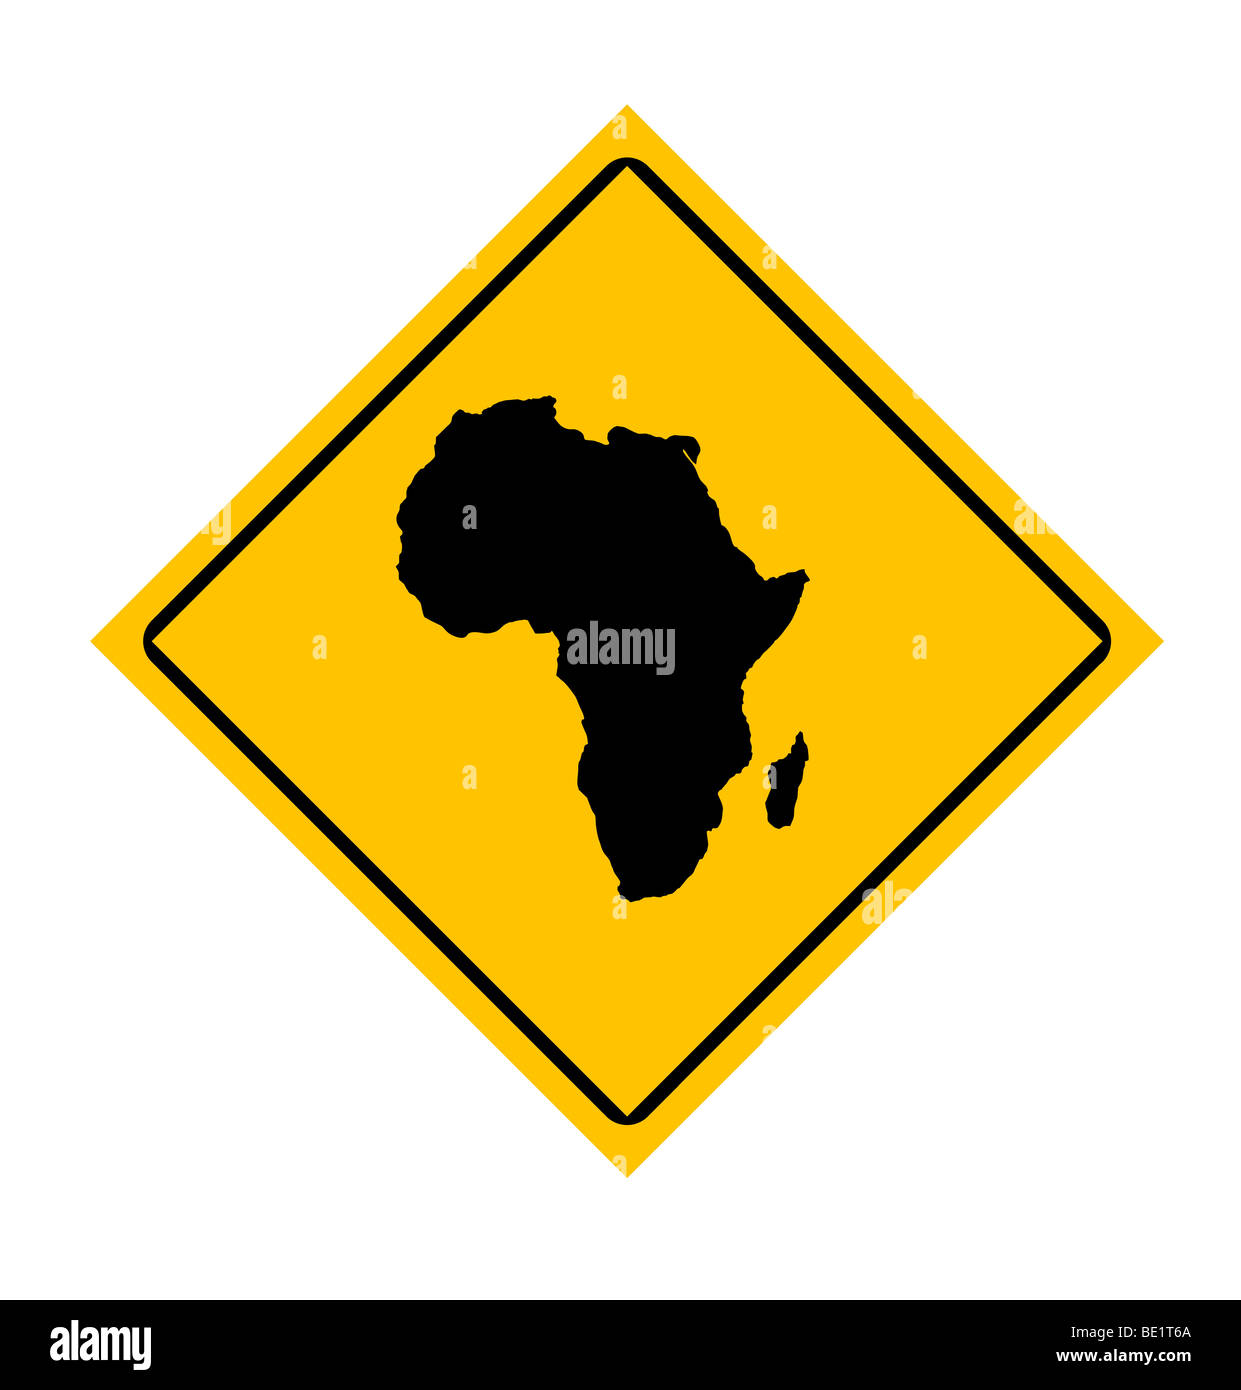 African continent road sign, isolated on white background. Stock Photo